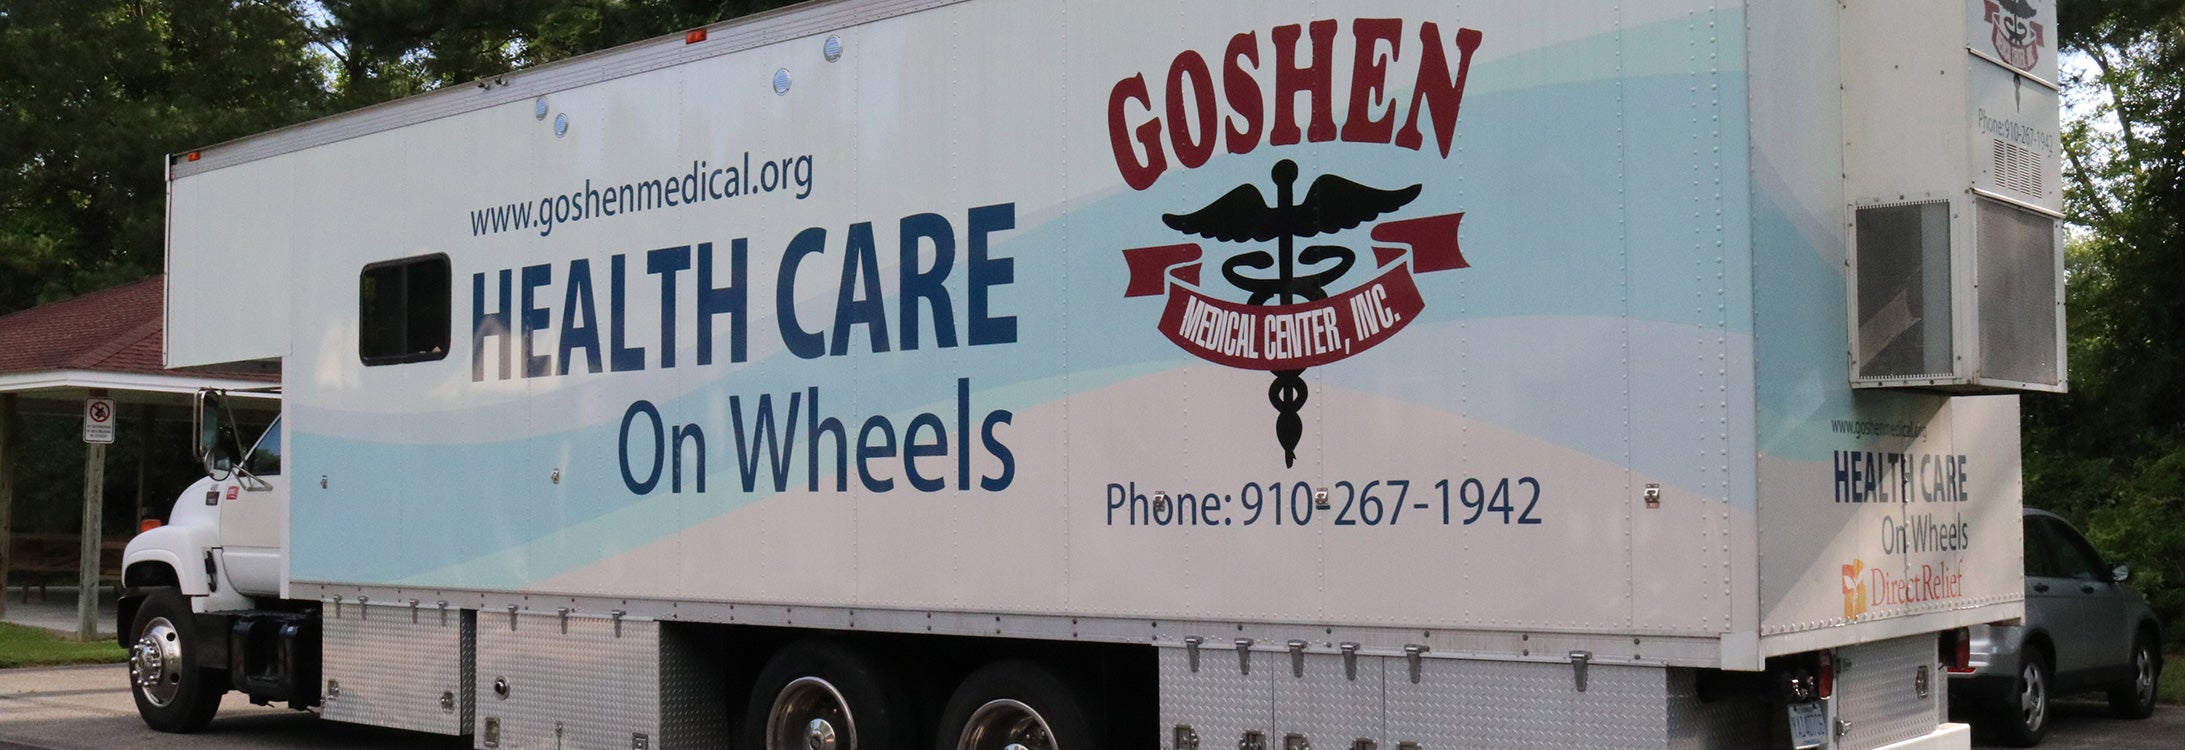 The new Goshen Medical Center mobile medical van will transport health care providers and medical equipment to provide care in remote areas of eastern North Carolina. (Photo by Matt Smith)